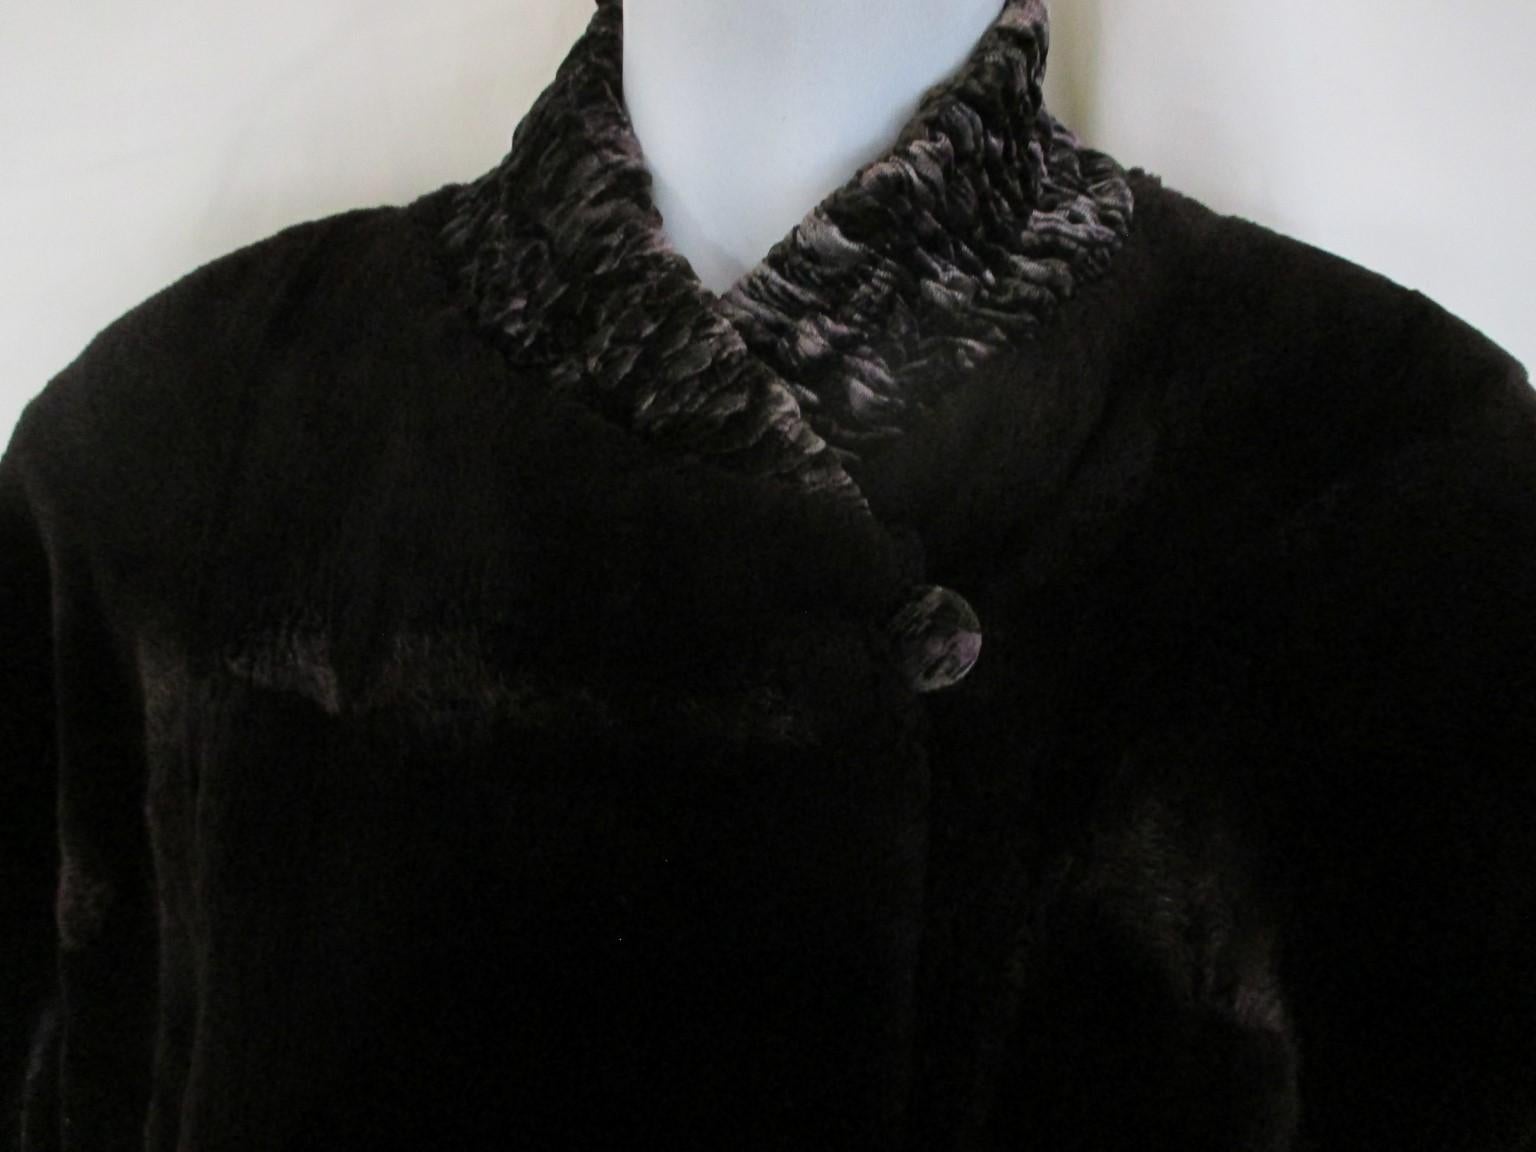 This cape style jacket is made of soft sheared mink which is reversible and can be worn from both sides.

We offer more exclusive fur items, view our fronstore.

Details:
One side is sheared mink and the other side soft velvet with flowers